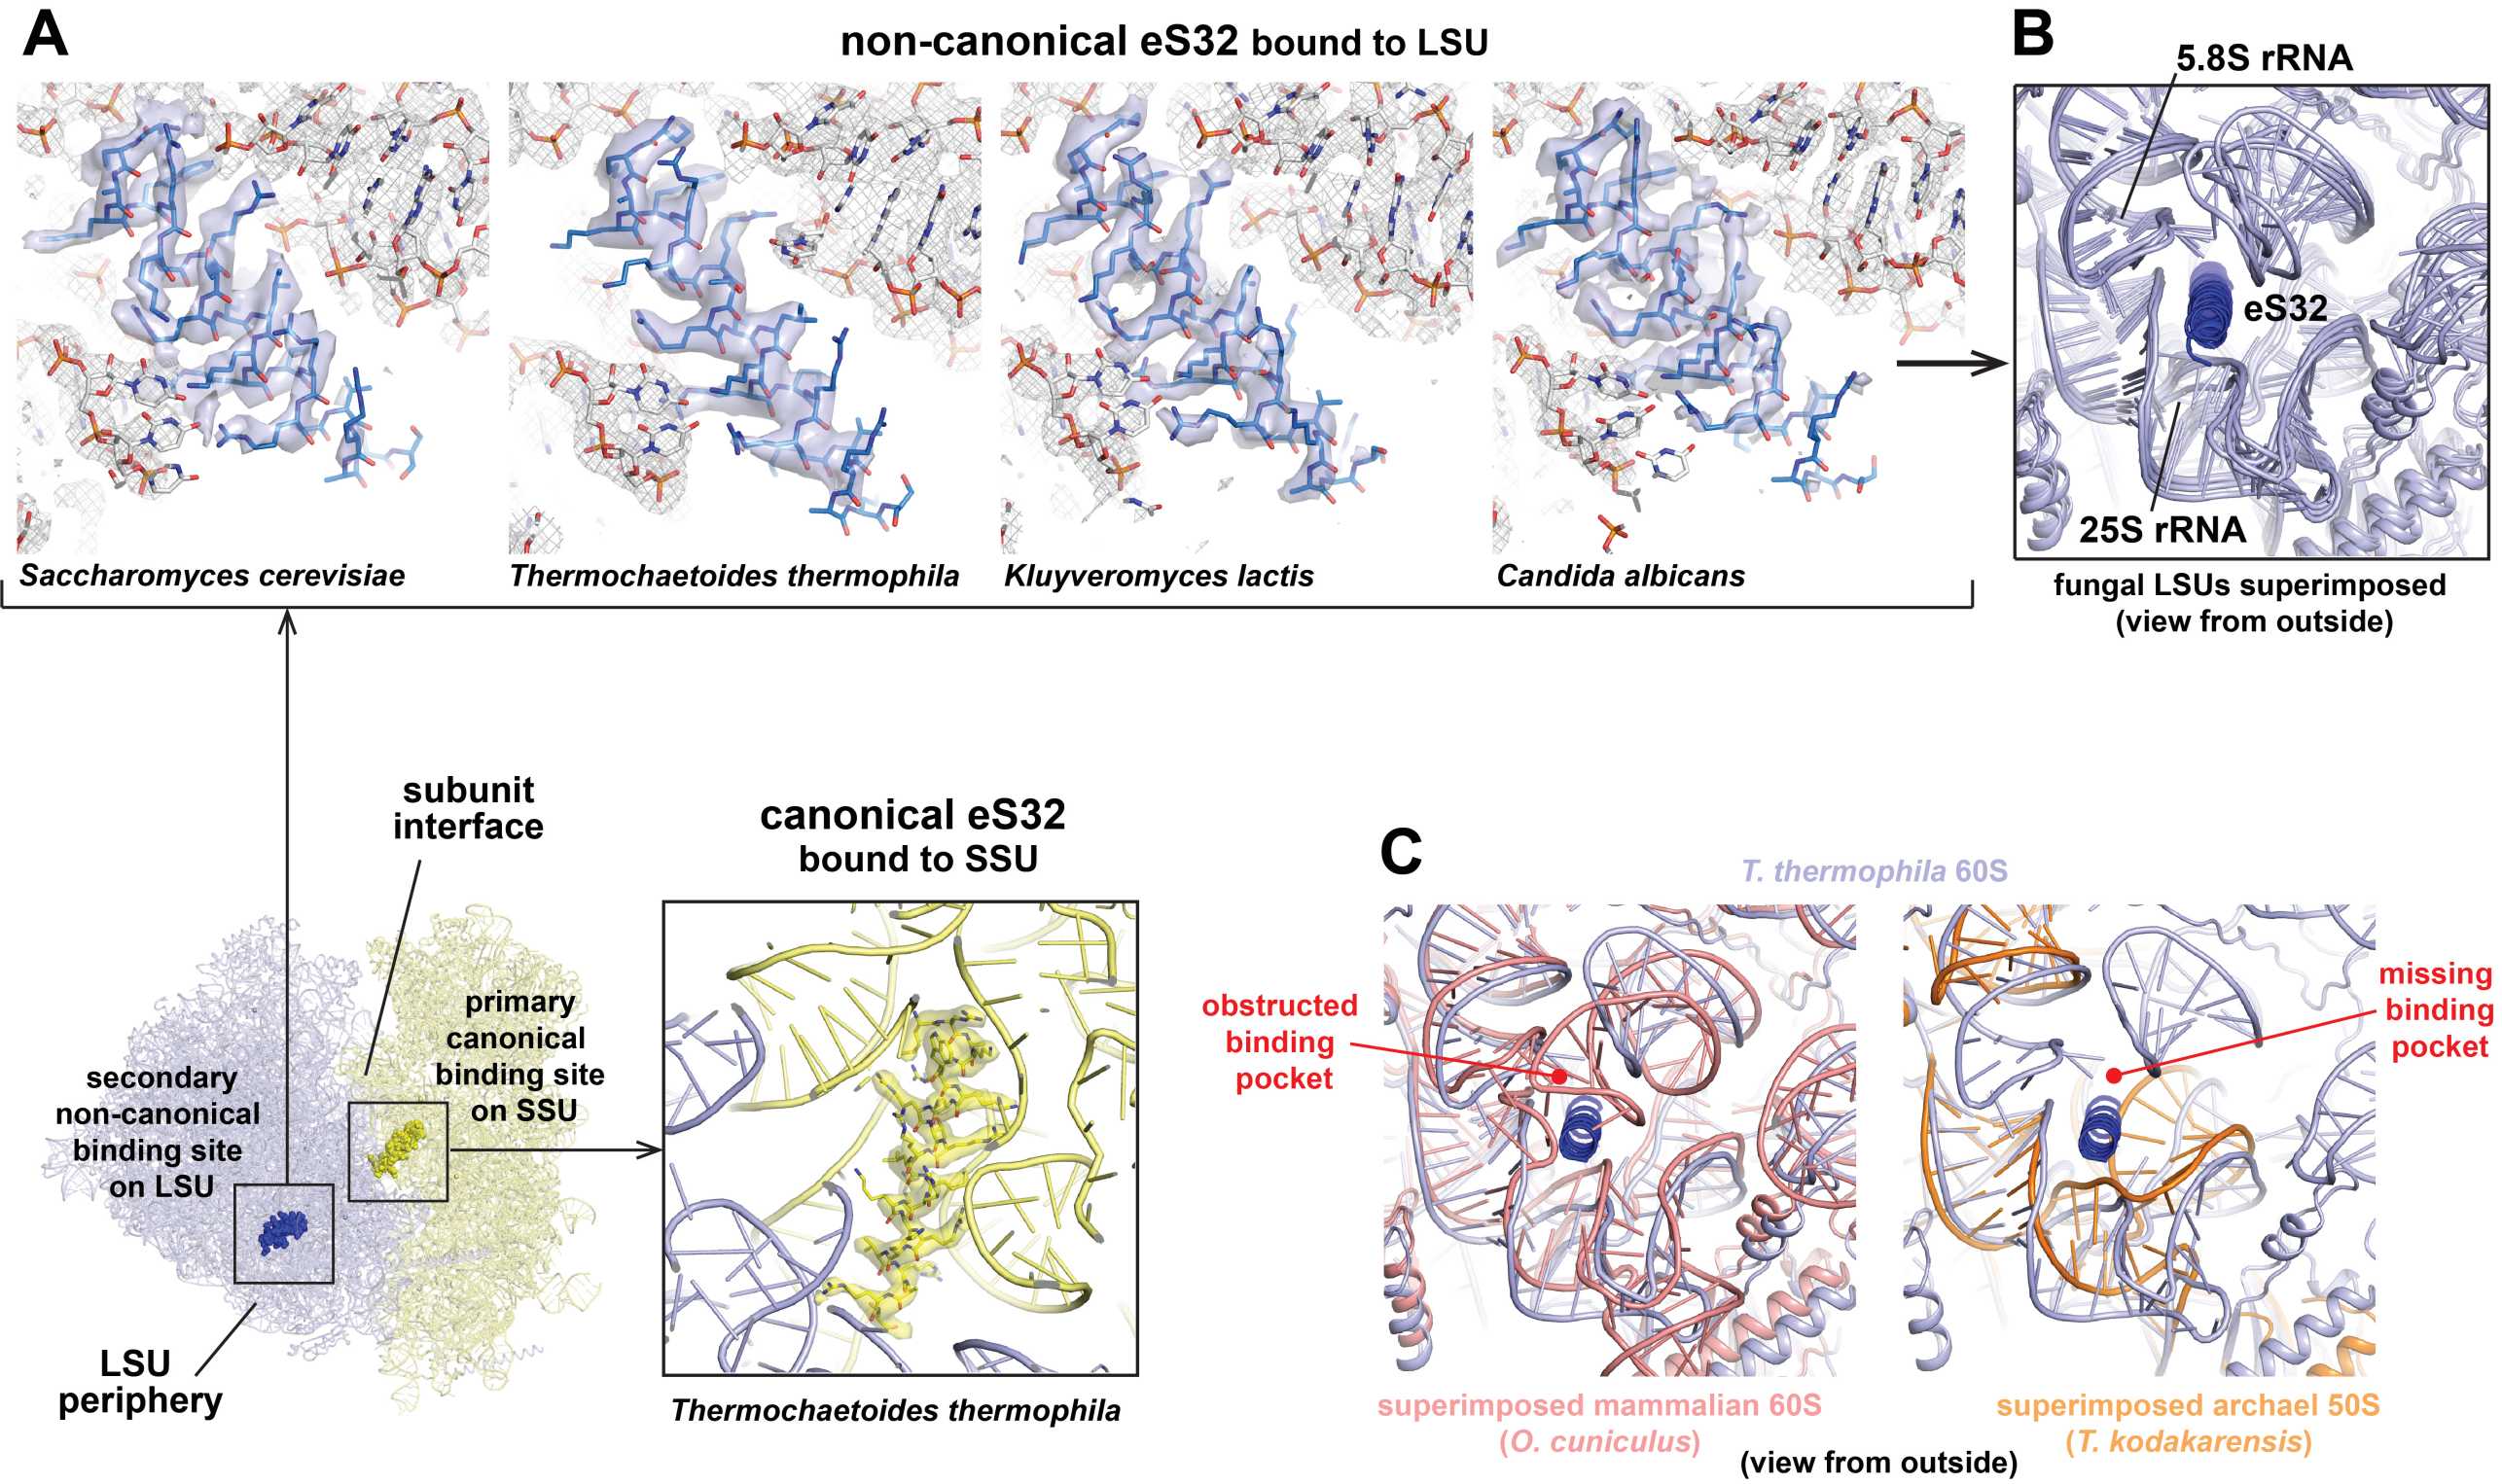 Non-canonical binding of eS32 at the periphery of the large ribosomal subunit.